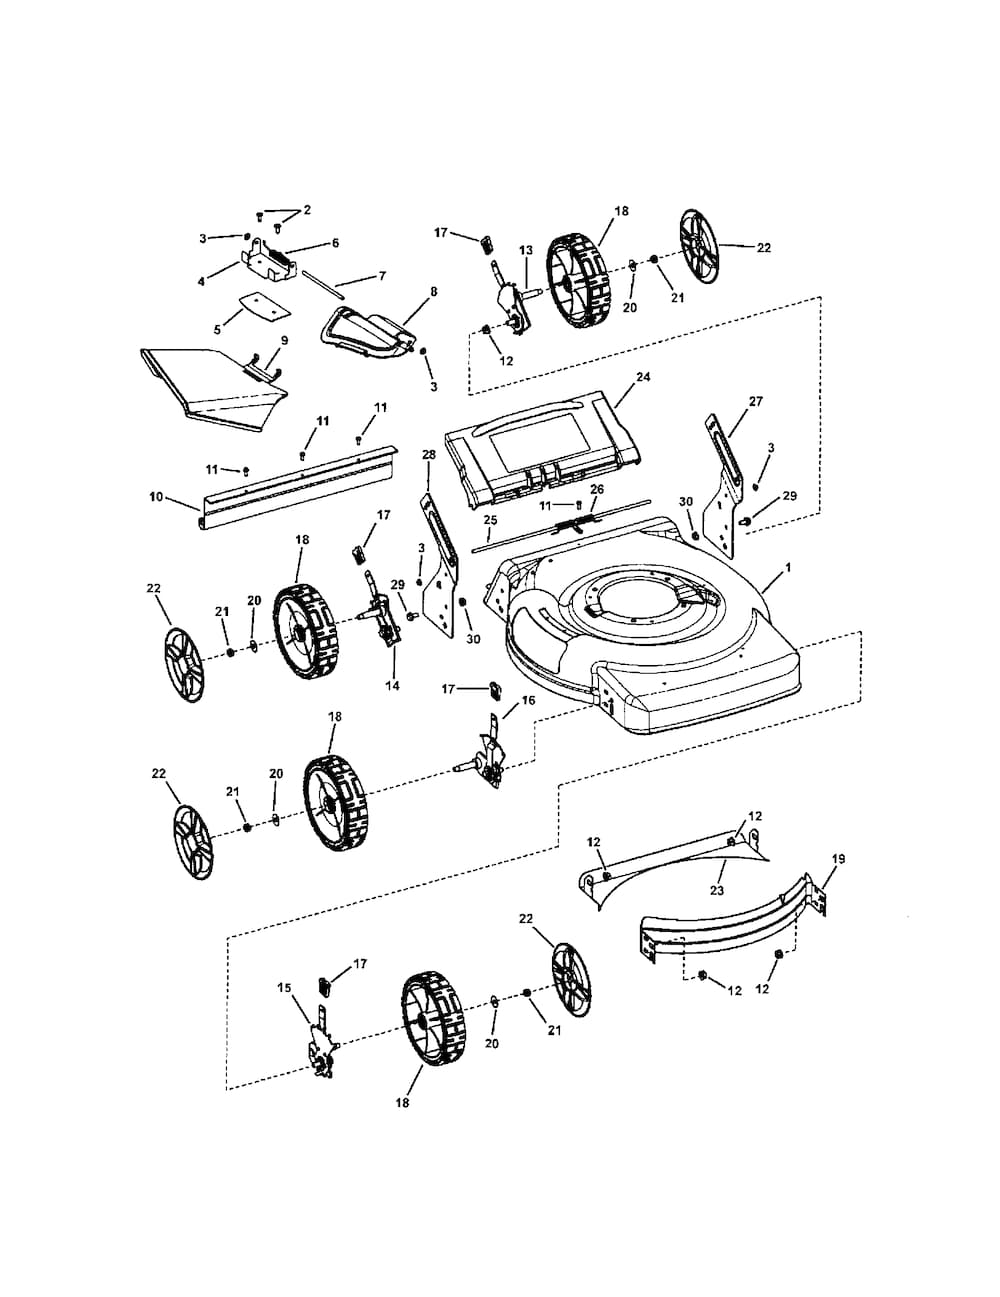 Snapper Lawn Mower Parts List http://www.searspartsdirect.com ...